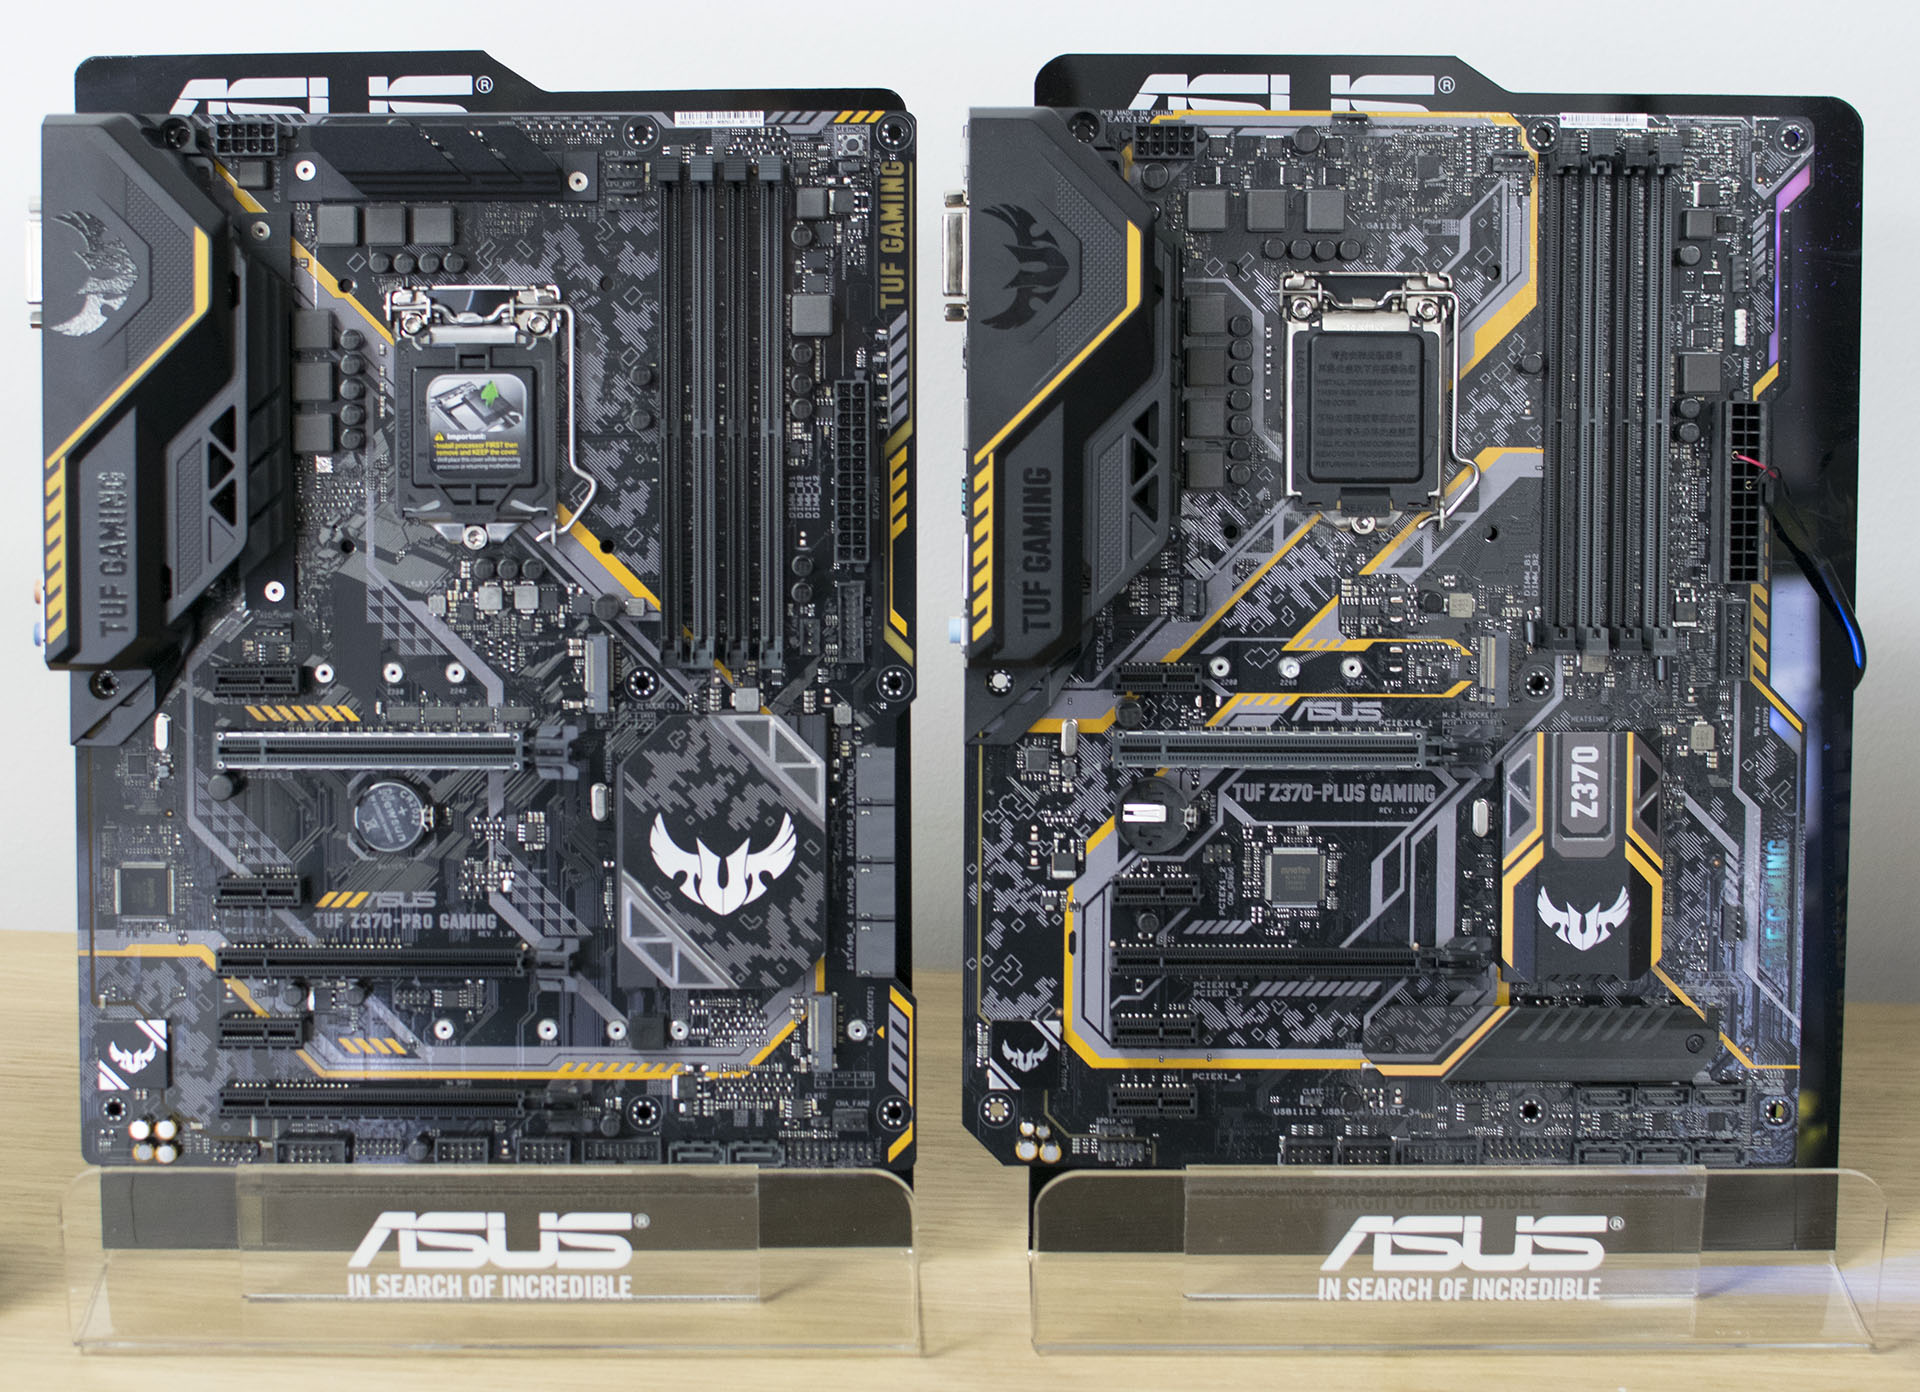 Eddike grammatik Ofte talt ASUS TUF Z370-PRO Gaming & Z370-PLUS Gaming - Analyzing Z370 for Intel's  8th Generation Coffee Lake: A Quick Look at 50+ Motherboards